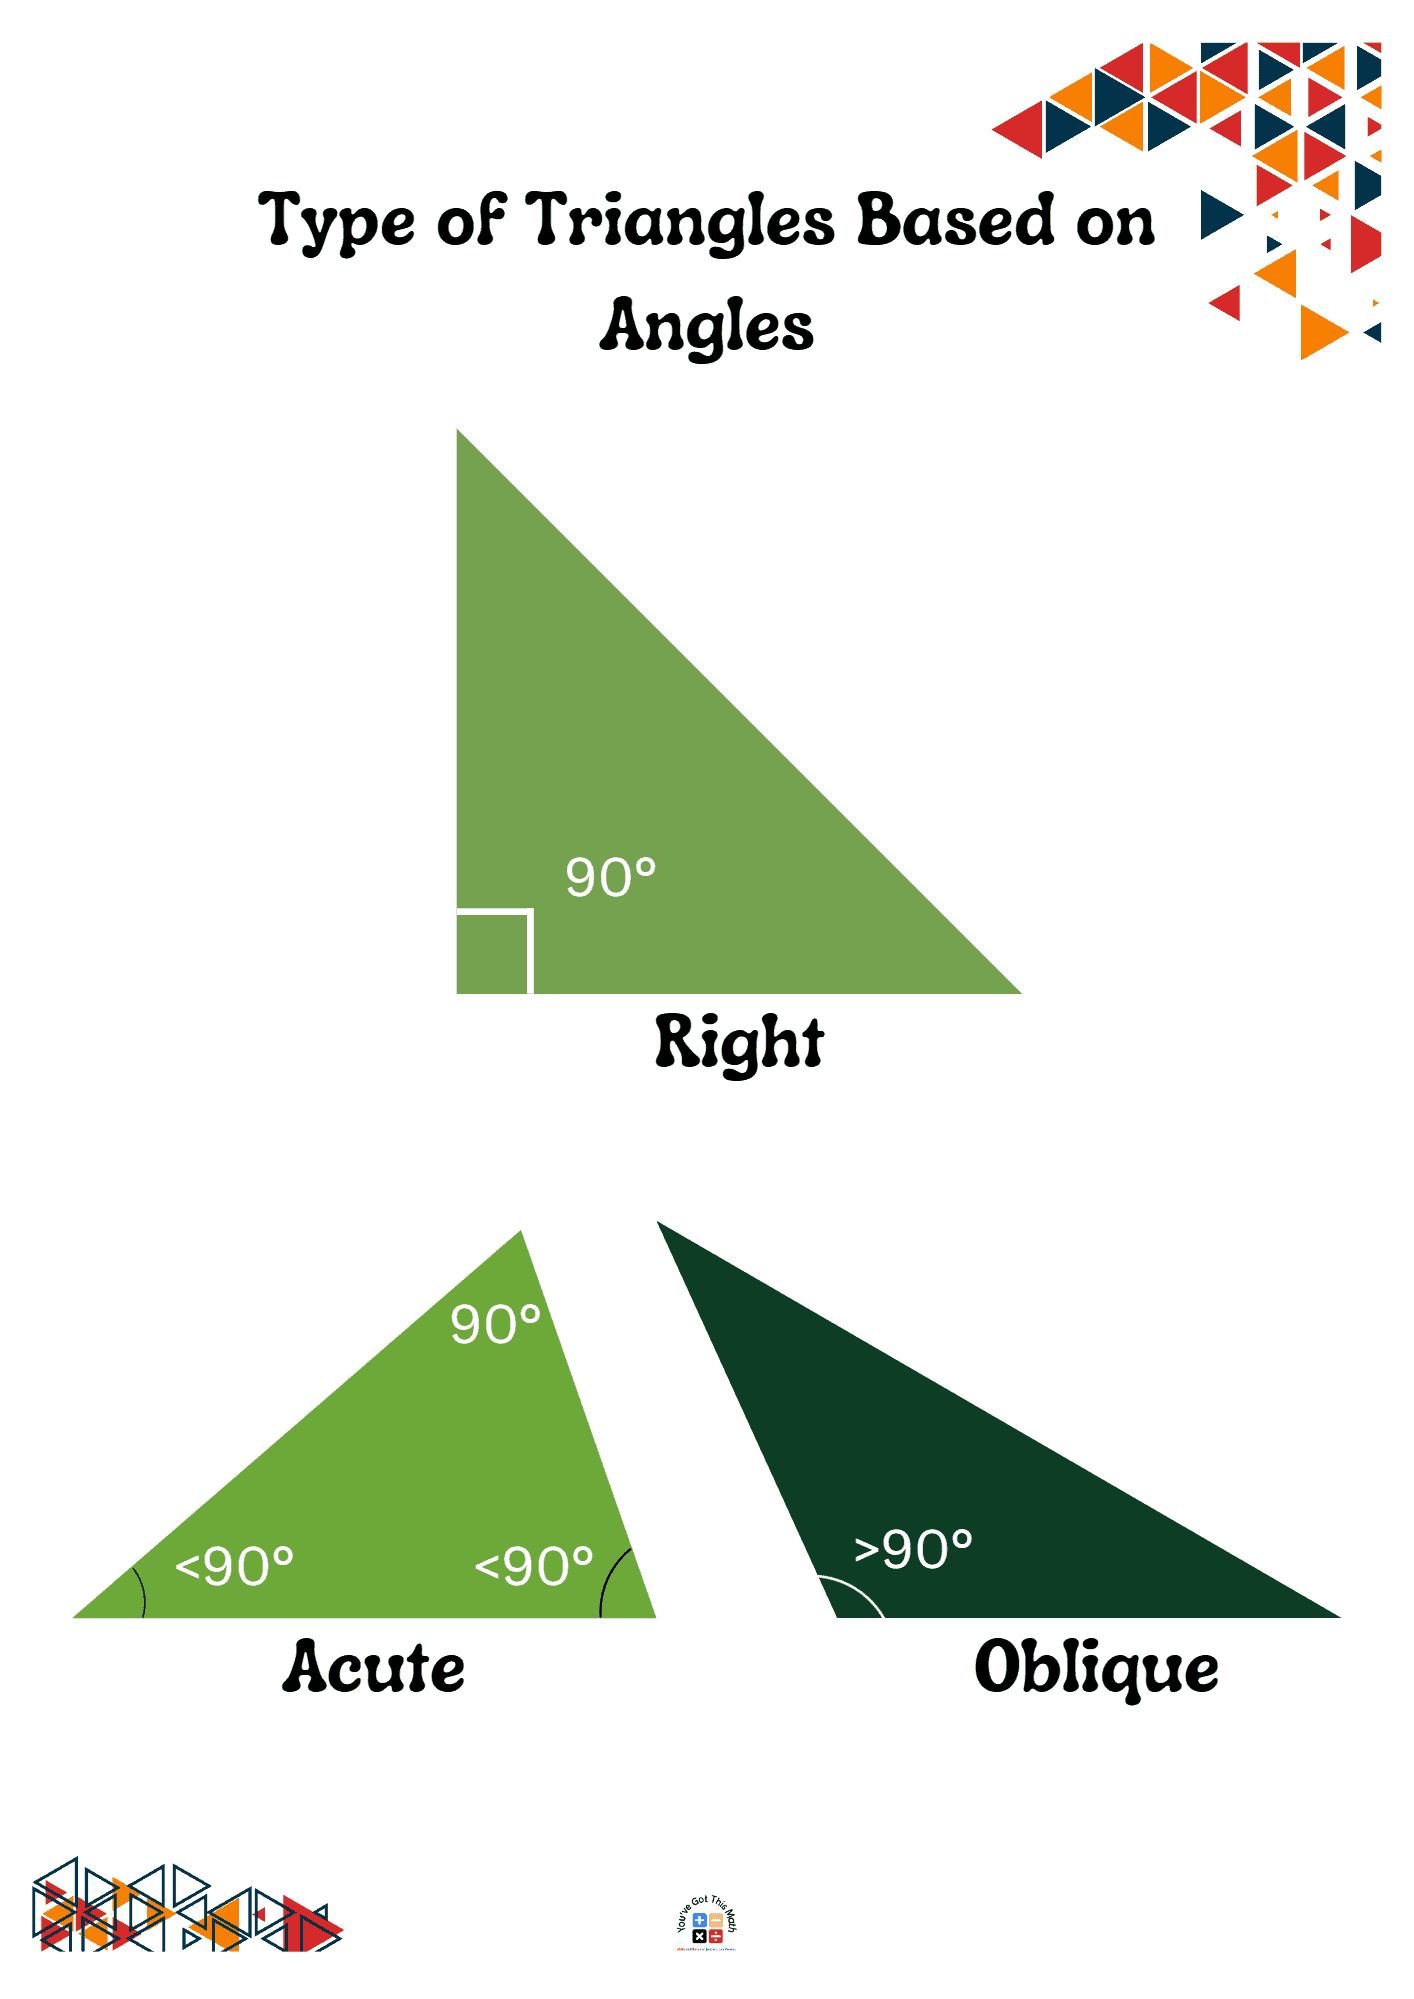 Showing Different Types of Triangles Based on Angles